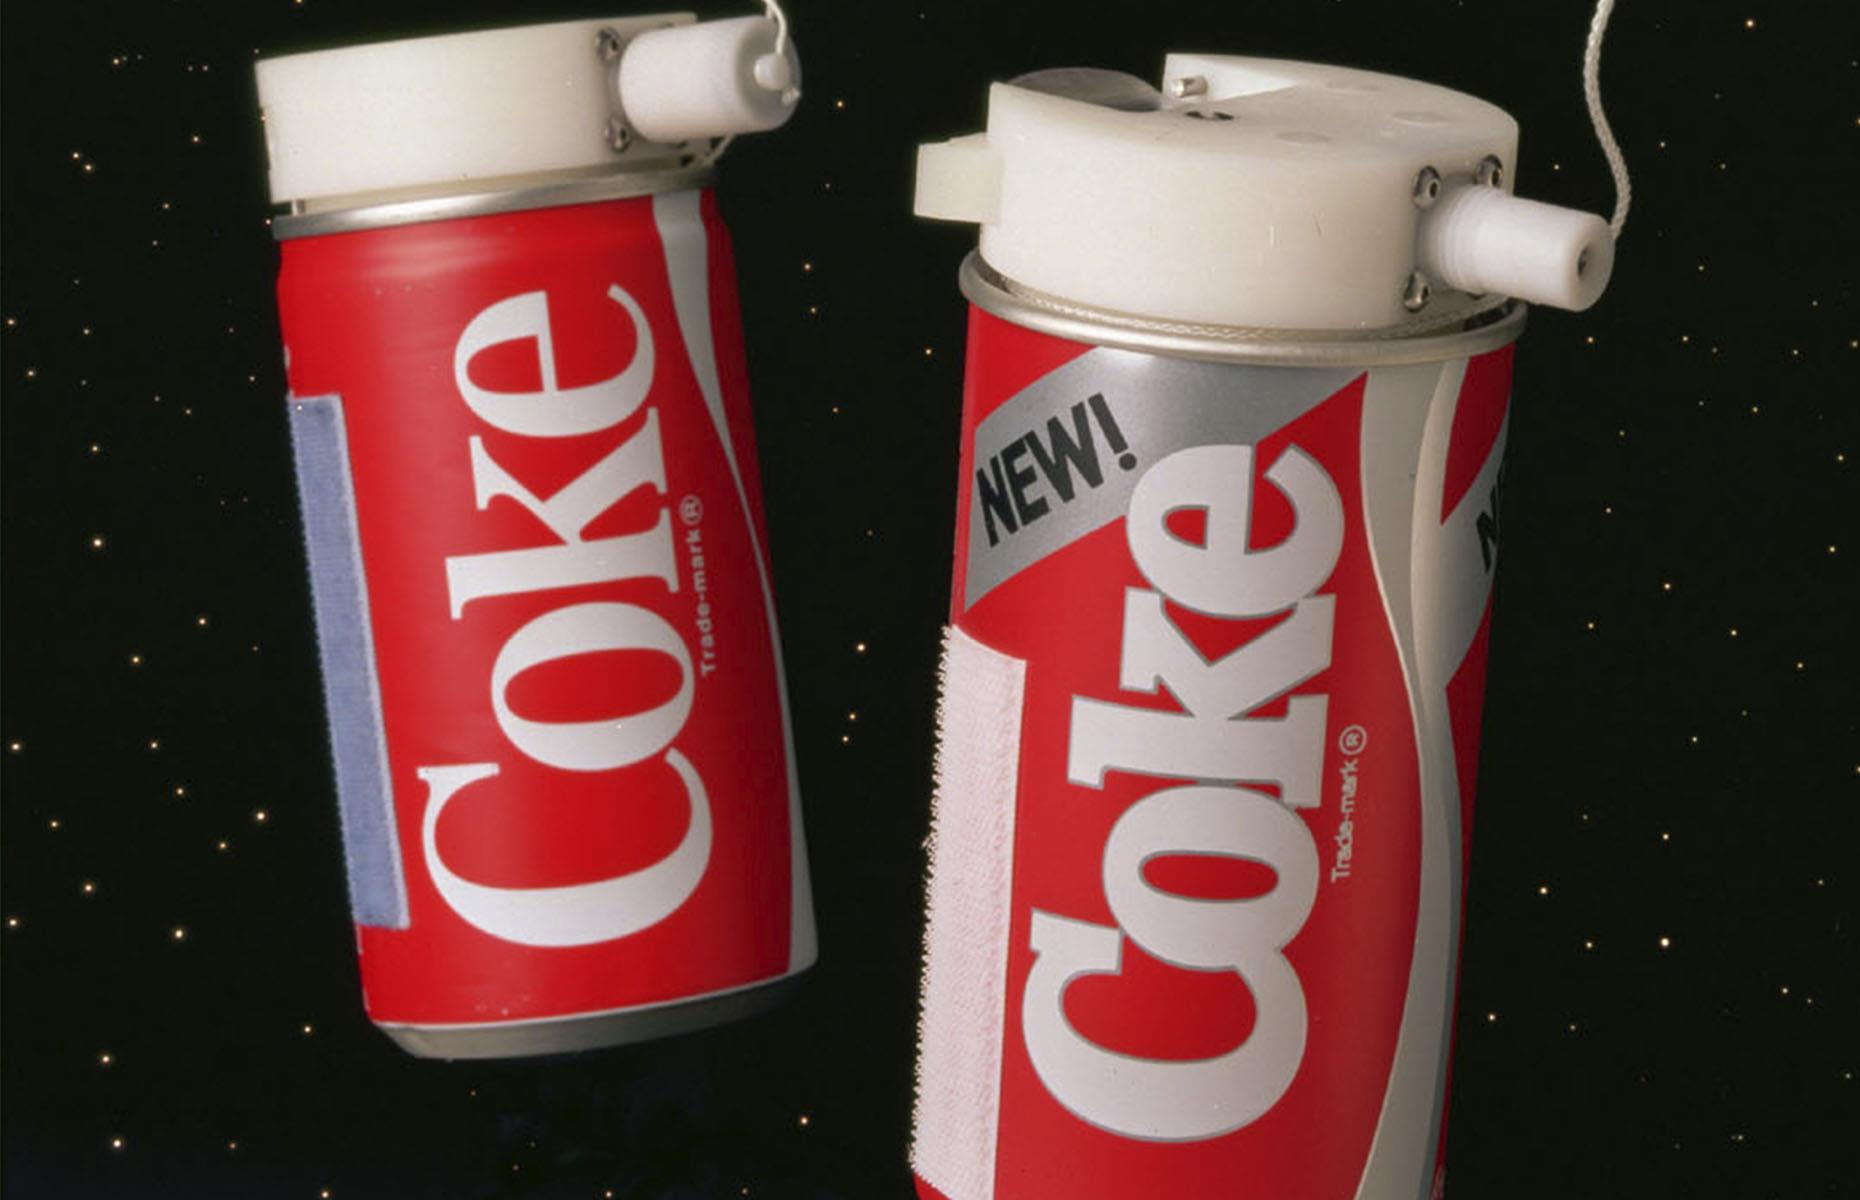 The 1980s was a particularly exciting time for the brand, with Coca-Cola becoming the first soft drink to be consumed in space. In 1985, astronauts aboard the Space Shuttle Challenger drank the fizzy drink from special Coca-Cola space cans.